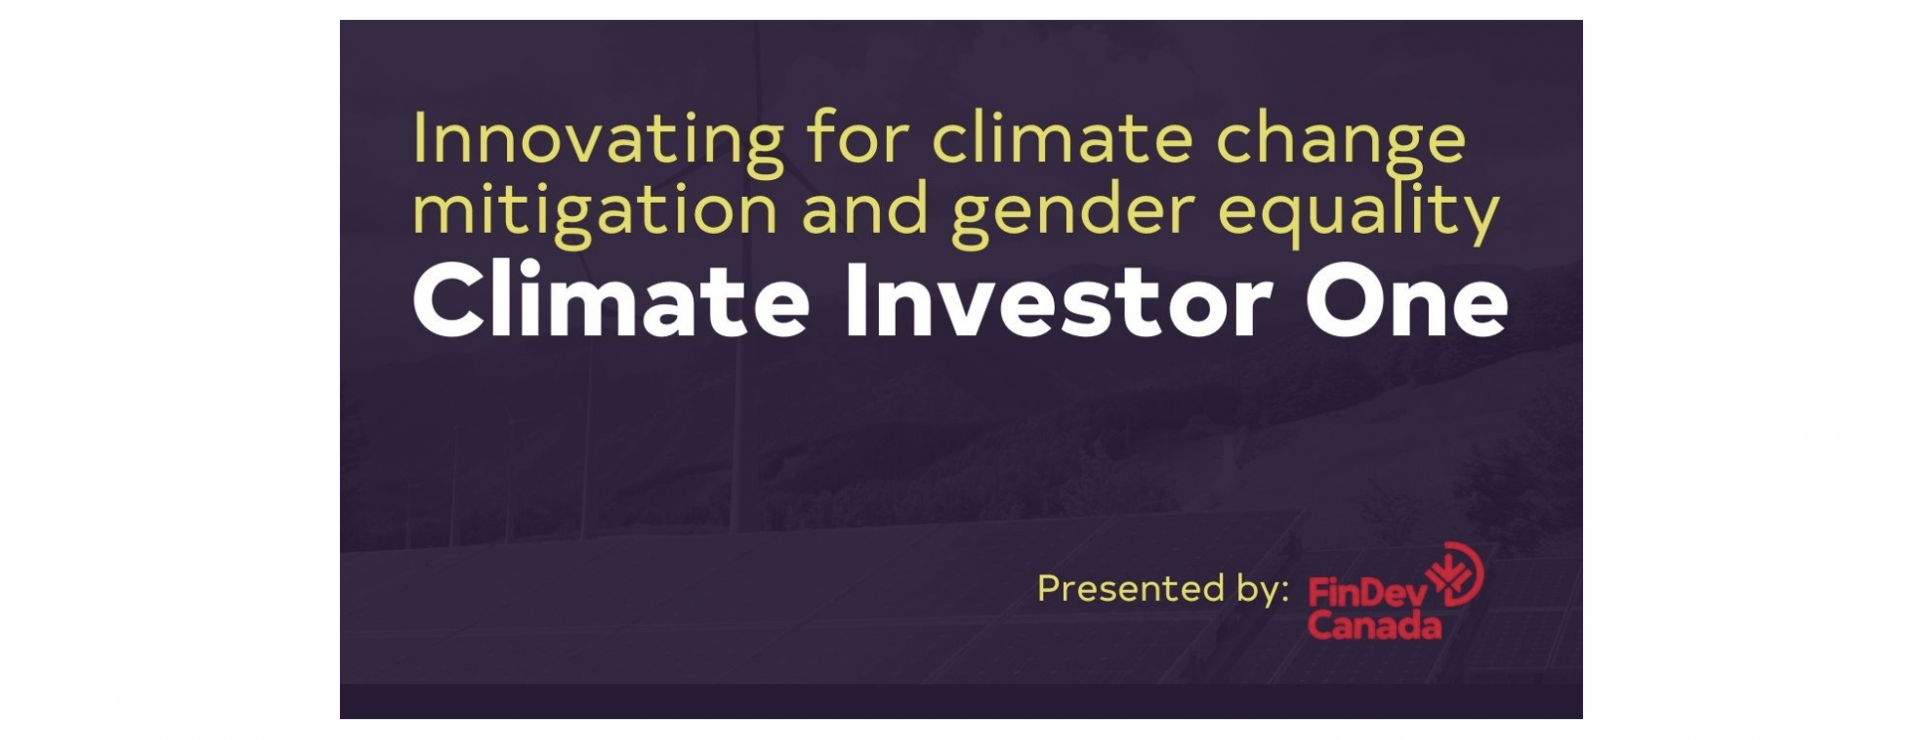 Climate Investor One